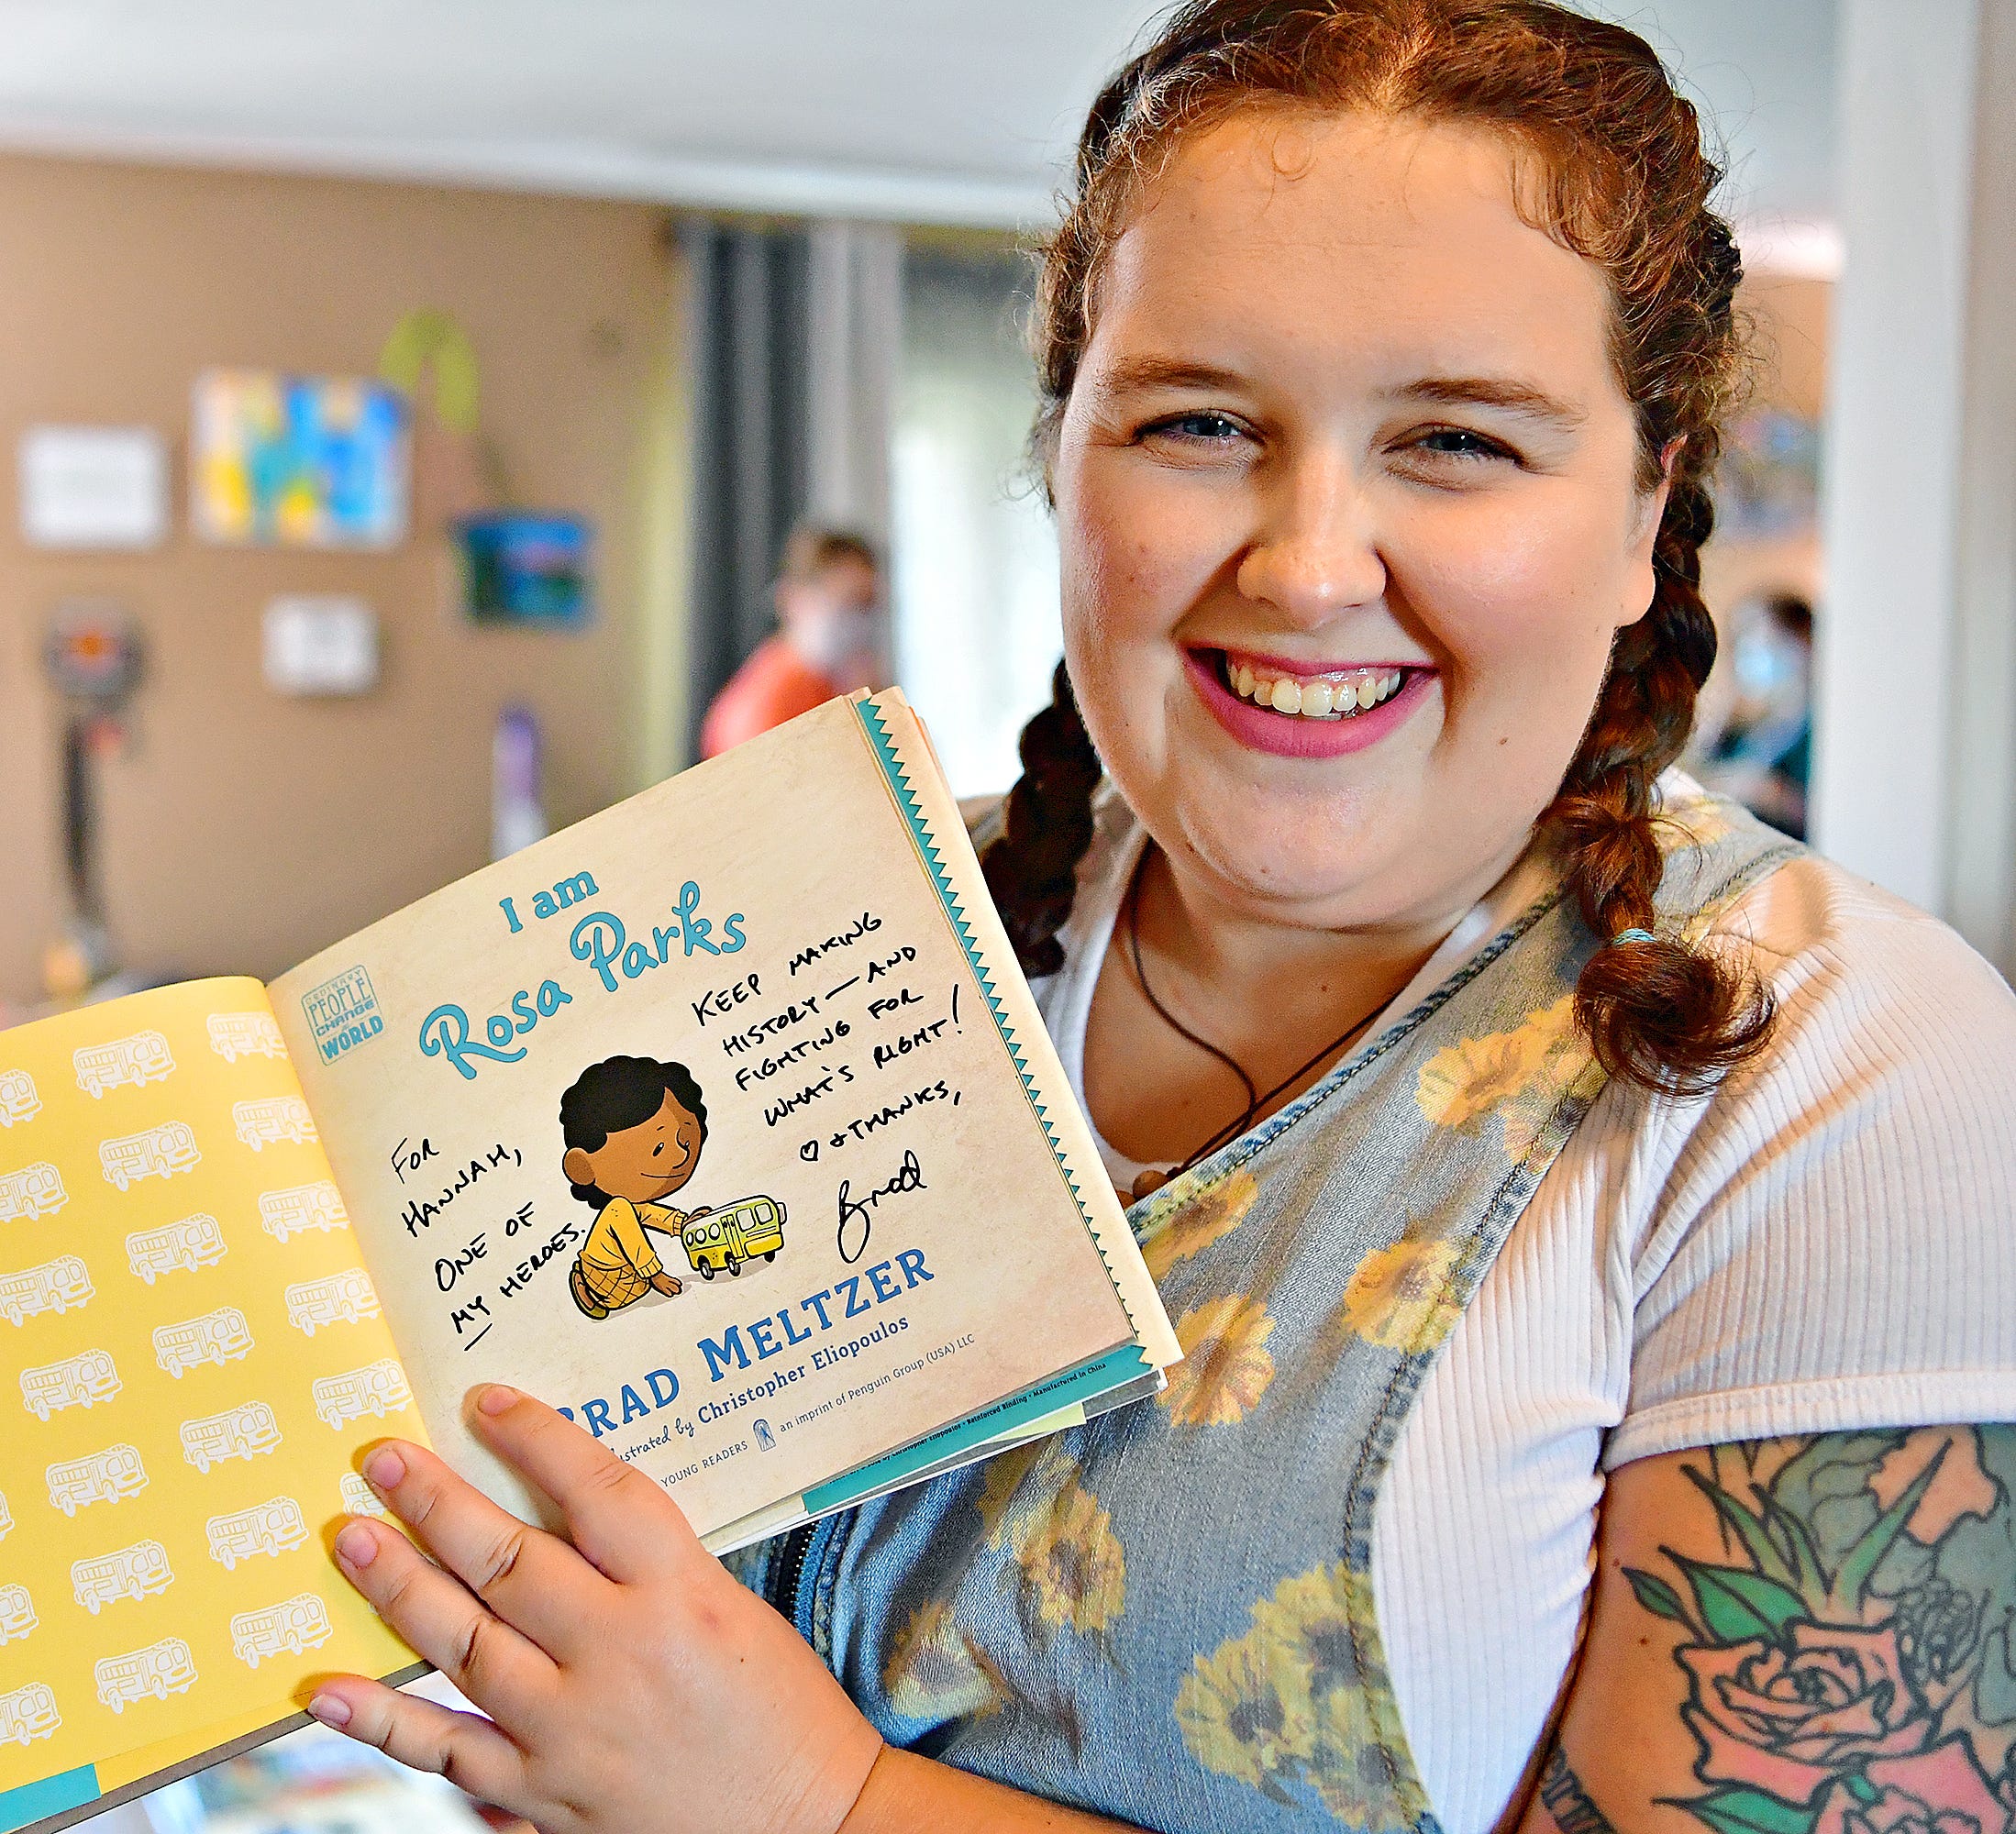 Hannah Shipley is shown with a signed copy of, "I am Rosa Parks" by Brad Meltzer, at her home in West Manchester Township, Thursday, Sept. 23, 2021. Meltzer shared Shipley's post on social media promoting her wish list, comprised of Central School District's banned resources, which included Meltzer's books. To date, Shipley has received about half of the 4,500 books that have been purchased. Dawn J. Sagert photo